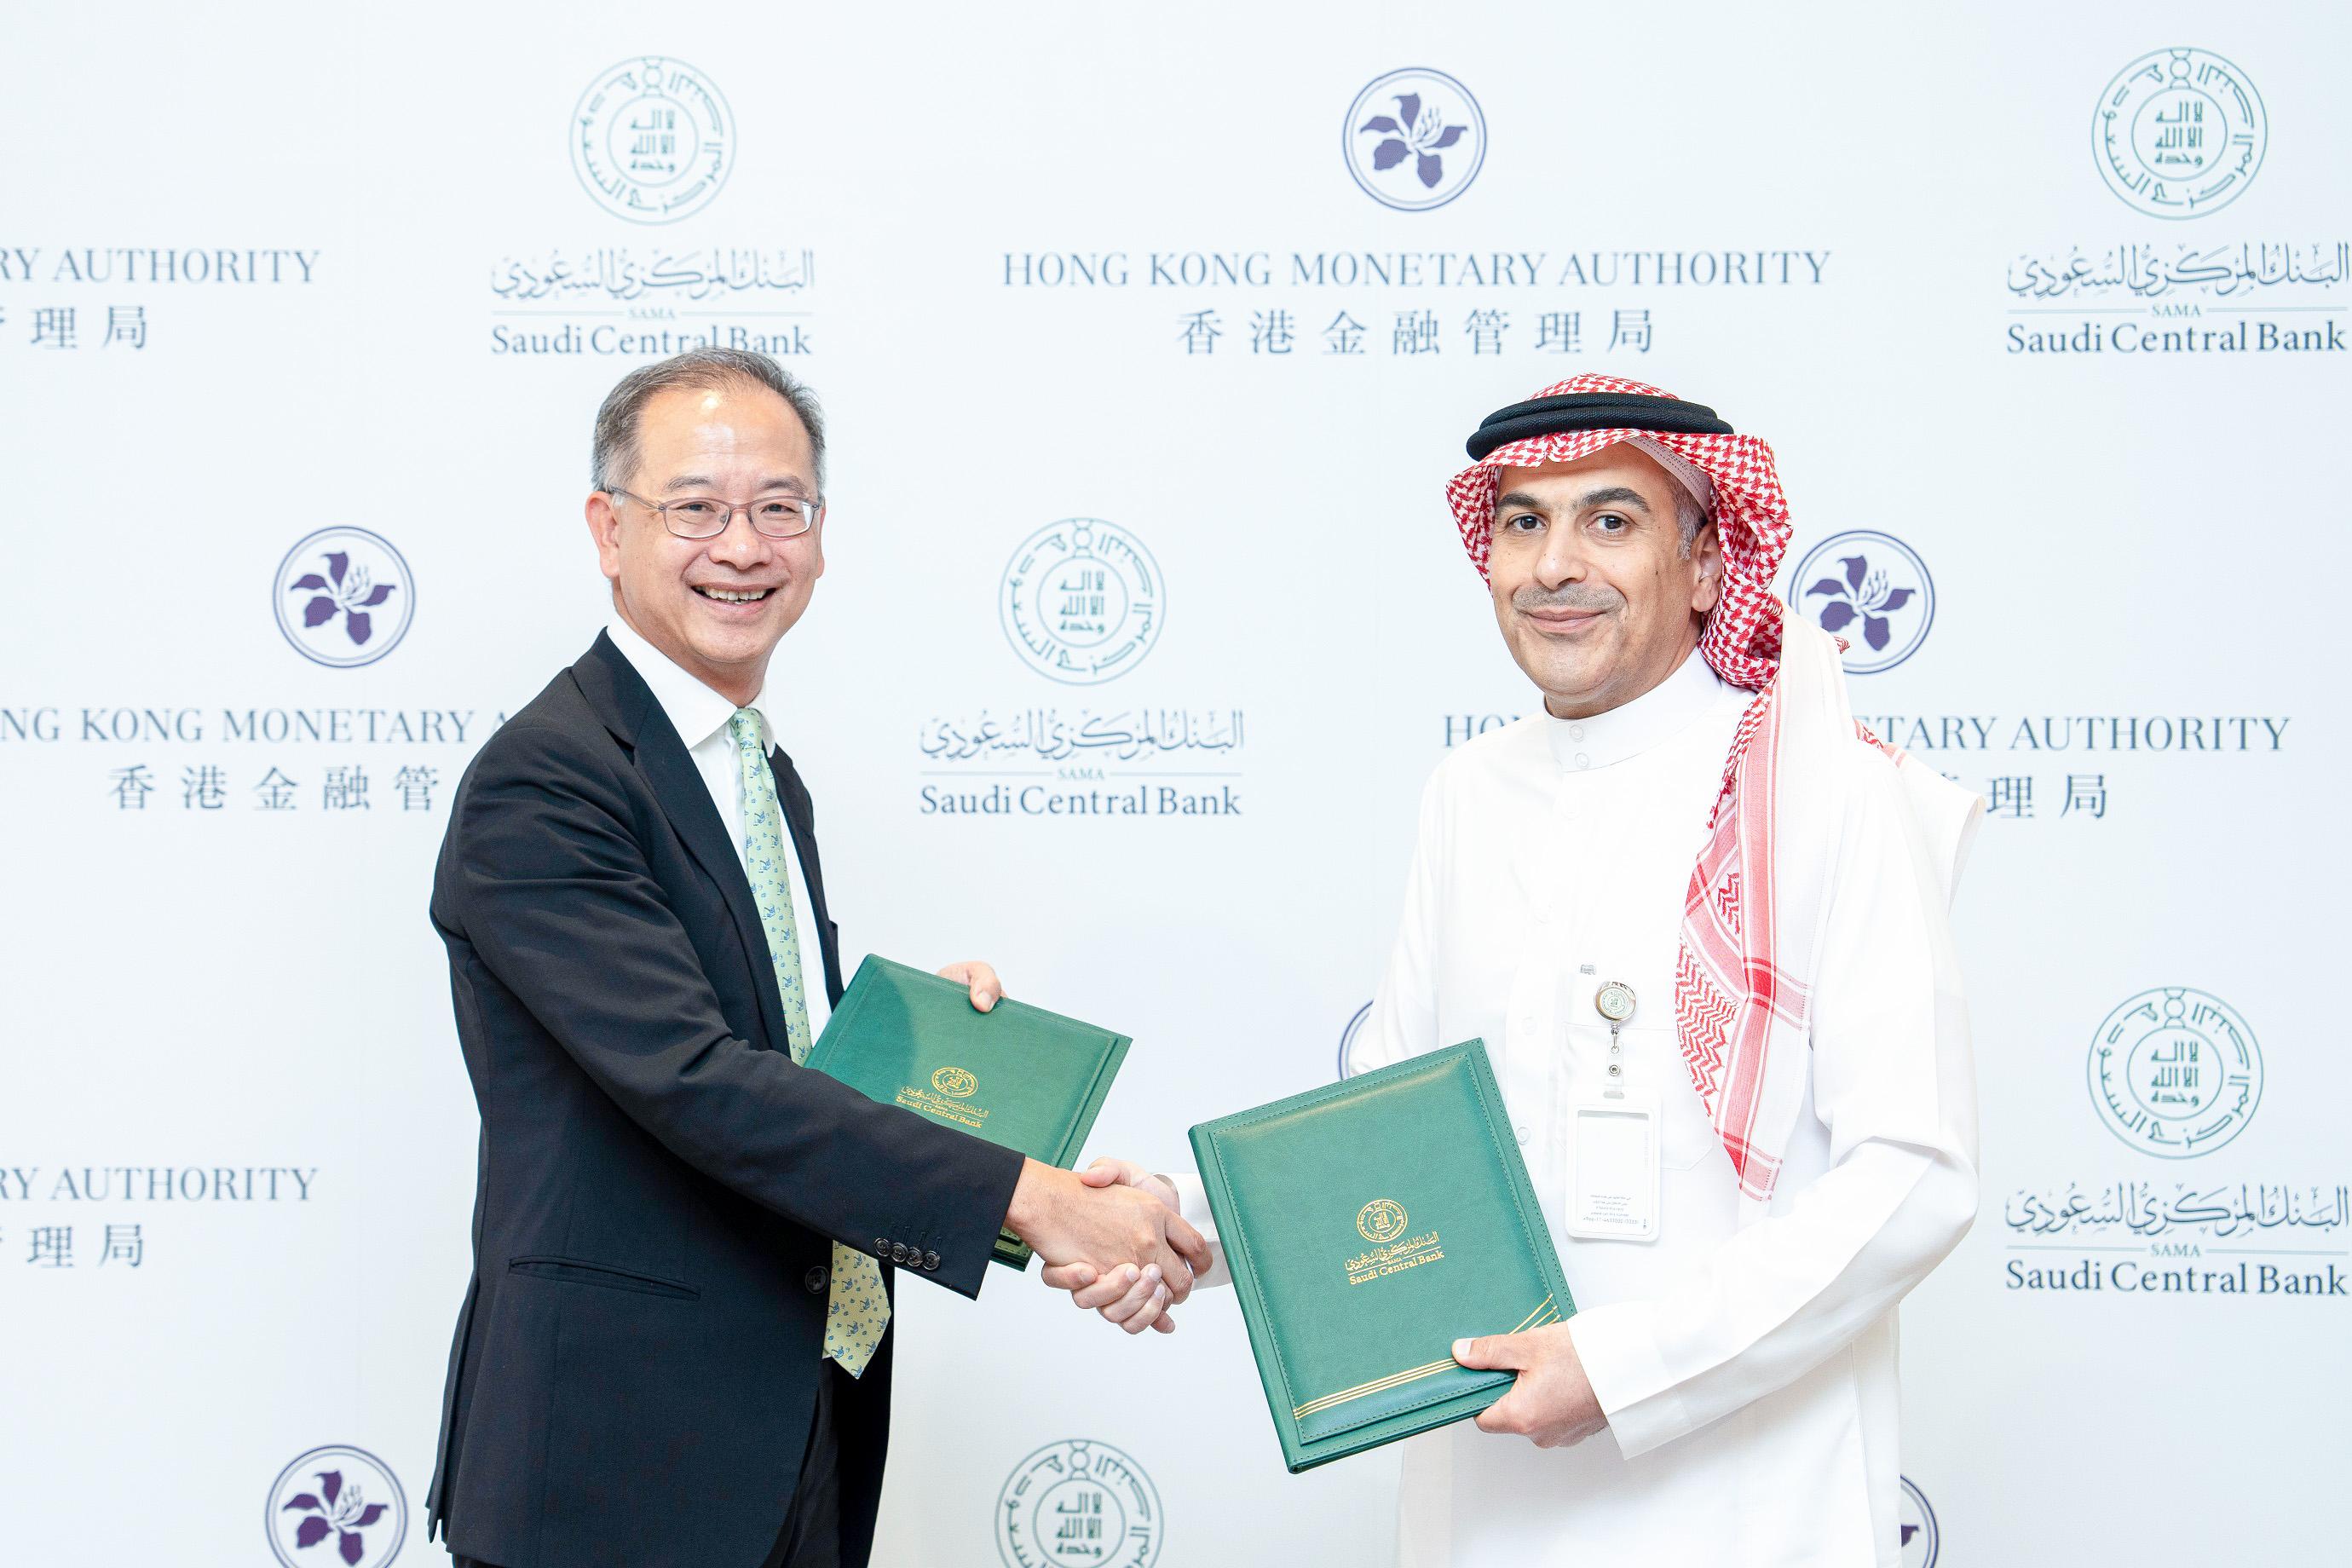 The Chief Executive of the Hong Kong Monetary Authority, Mr Eddie Yue (left) and the Governor of the Saudi Central Bank, Mr Ayman Alsayari (right) signed a Memorandum of Understanding on July 26 (Riyadh time) to promote collaboration on financial innovation.